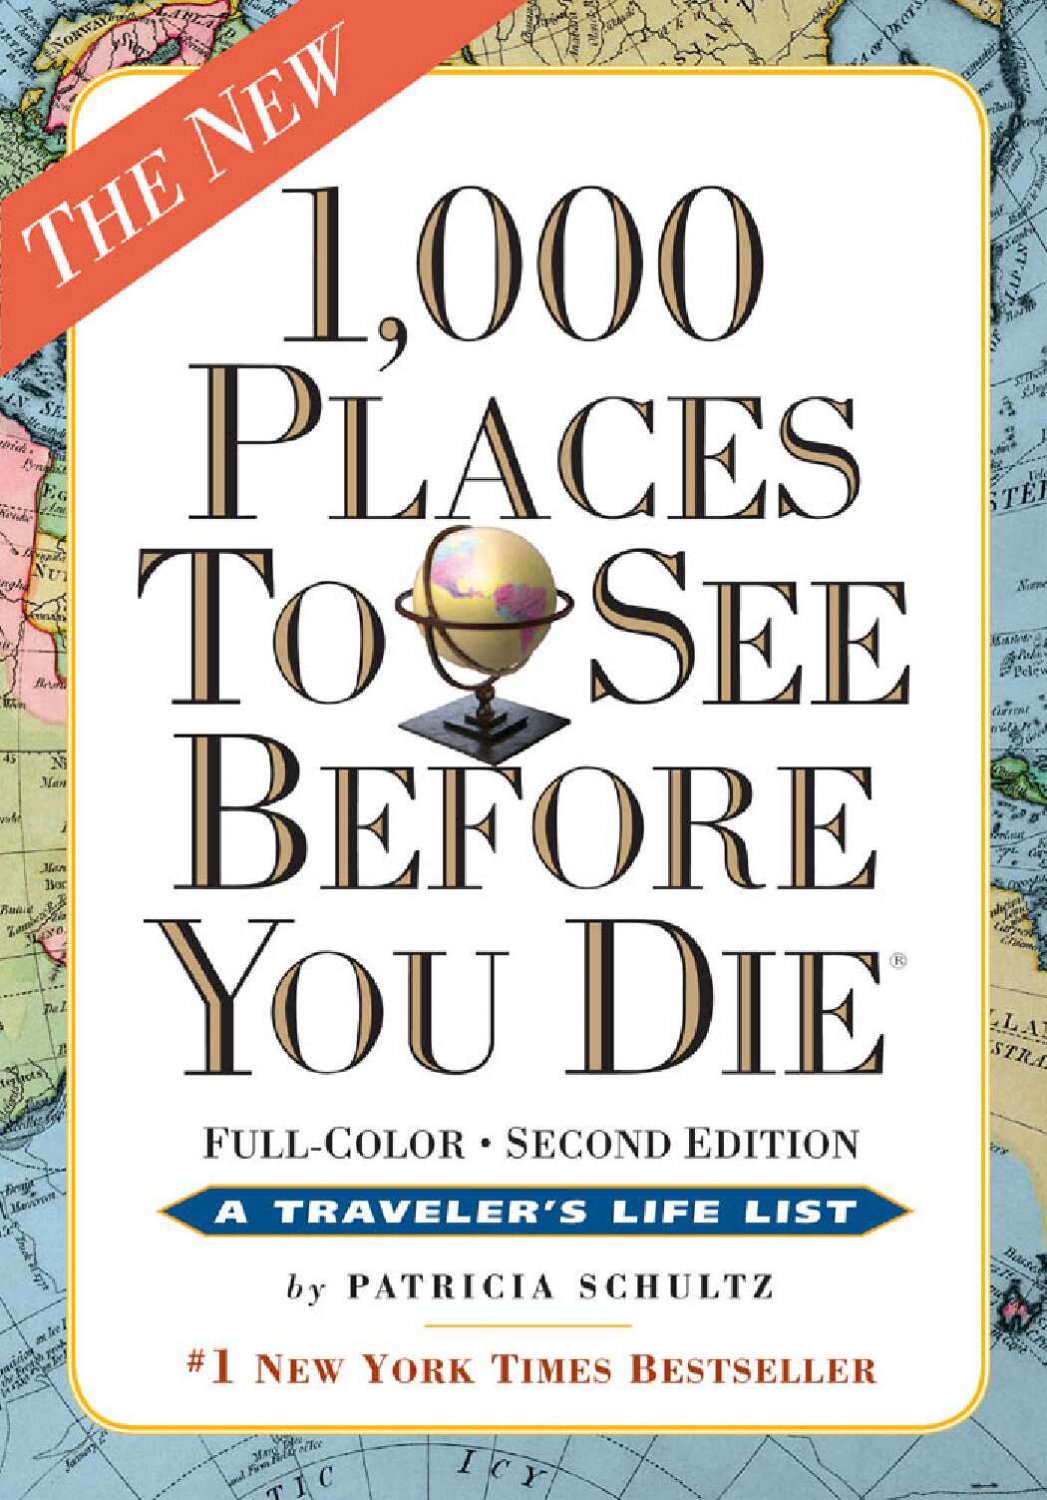 1,000 Places to See Before You Die: Completely Revised and Updated with Over 200 New Entries